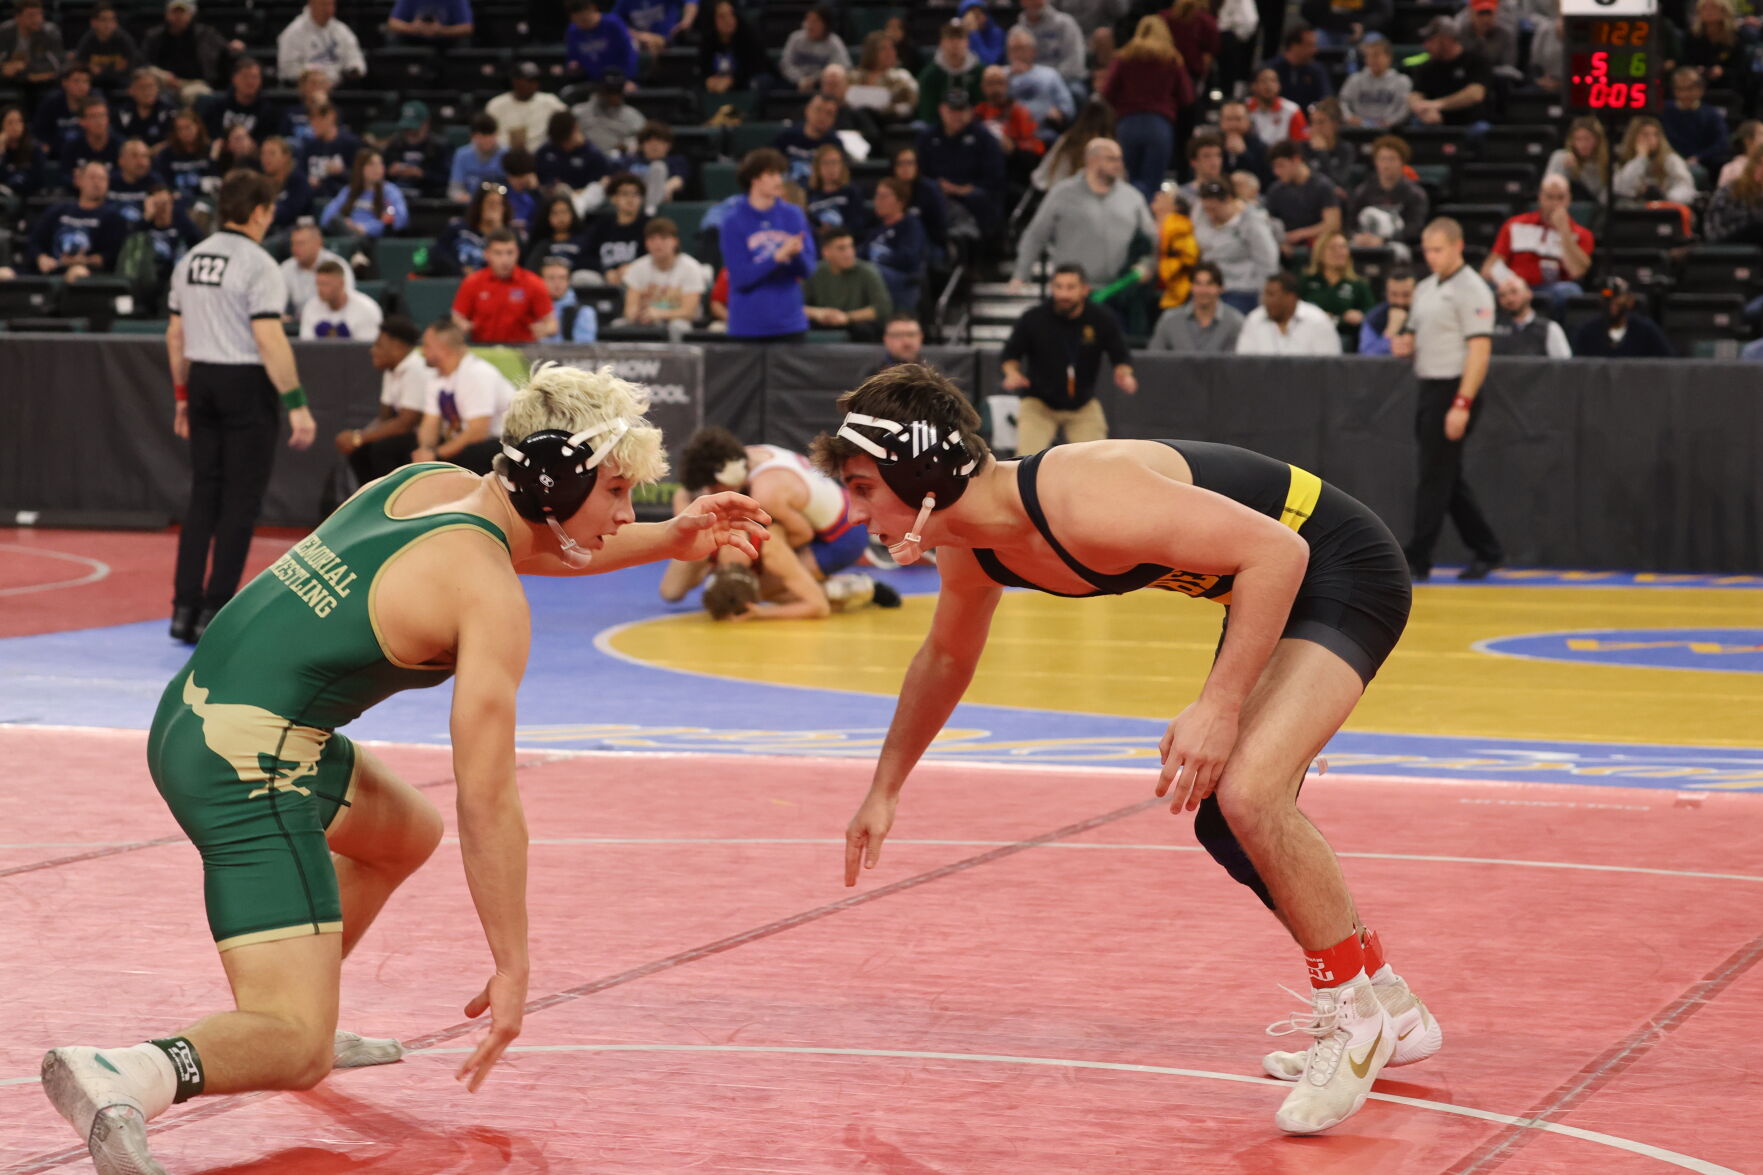 Team-by-team wrestling preview plus Elite 11 and more